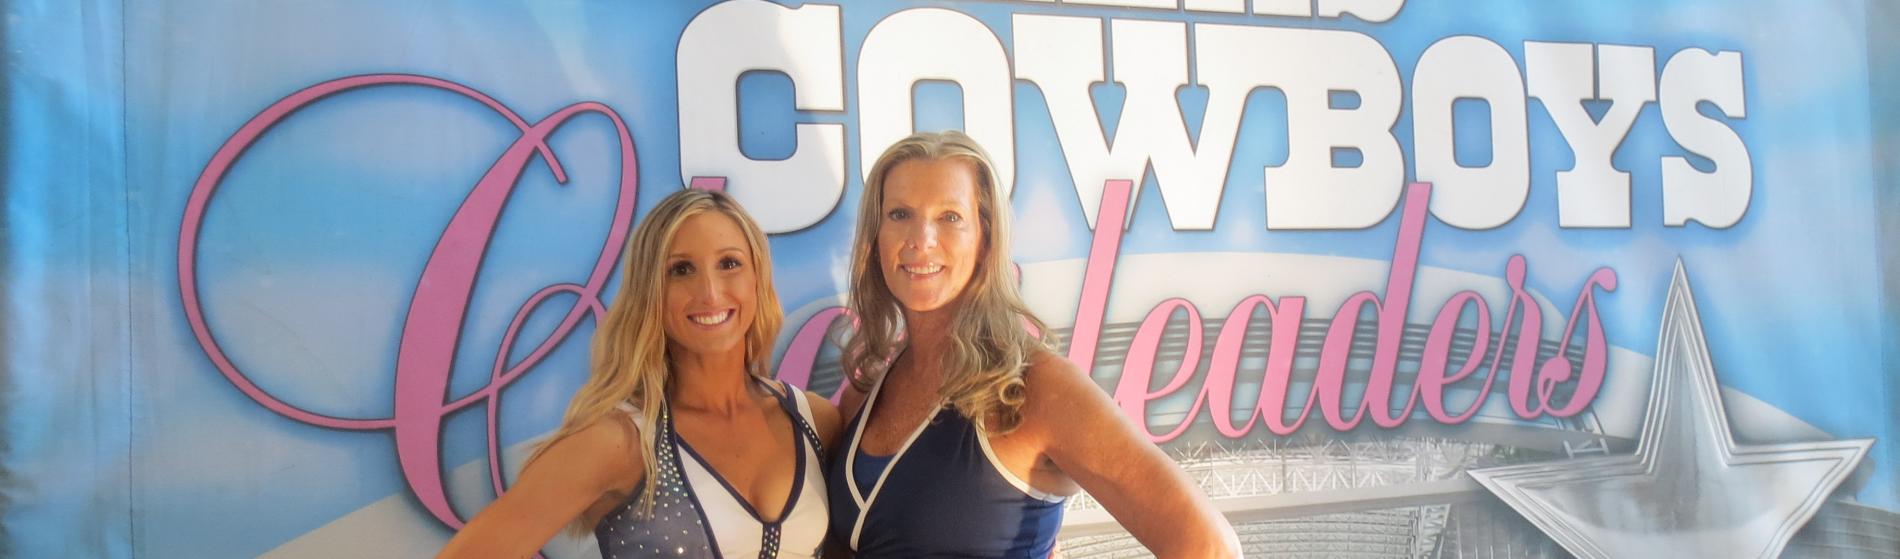 2017 Dallas Cowboys Cheerleaders Auditions: Fun Stuff from Rounds 1 & 2